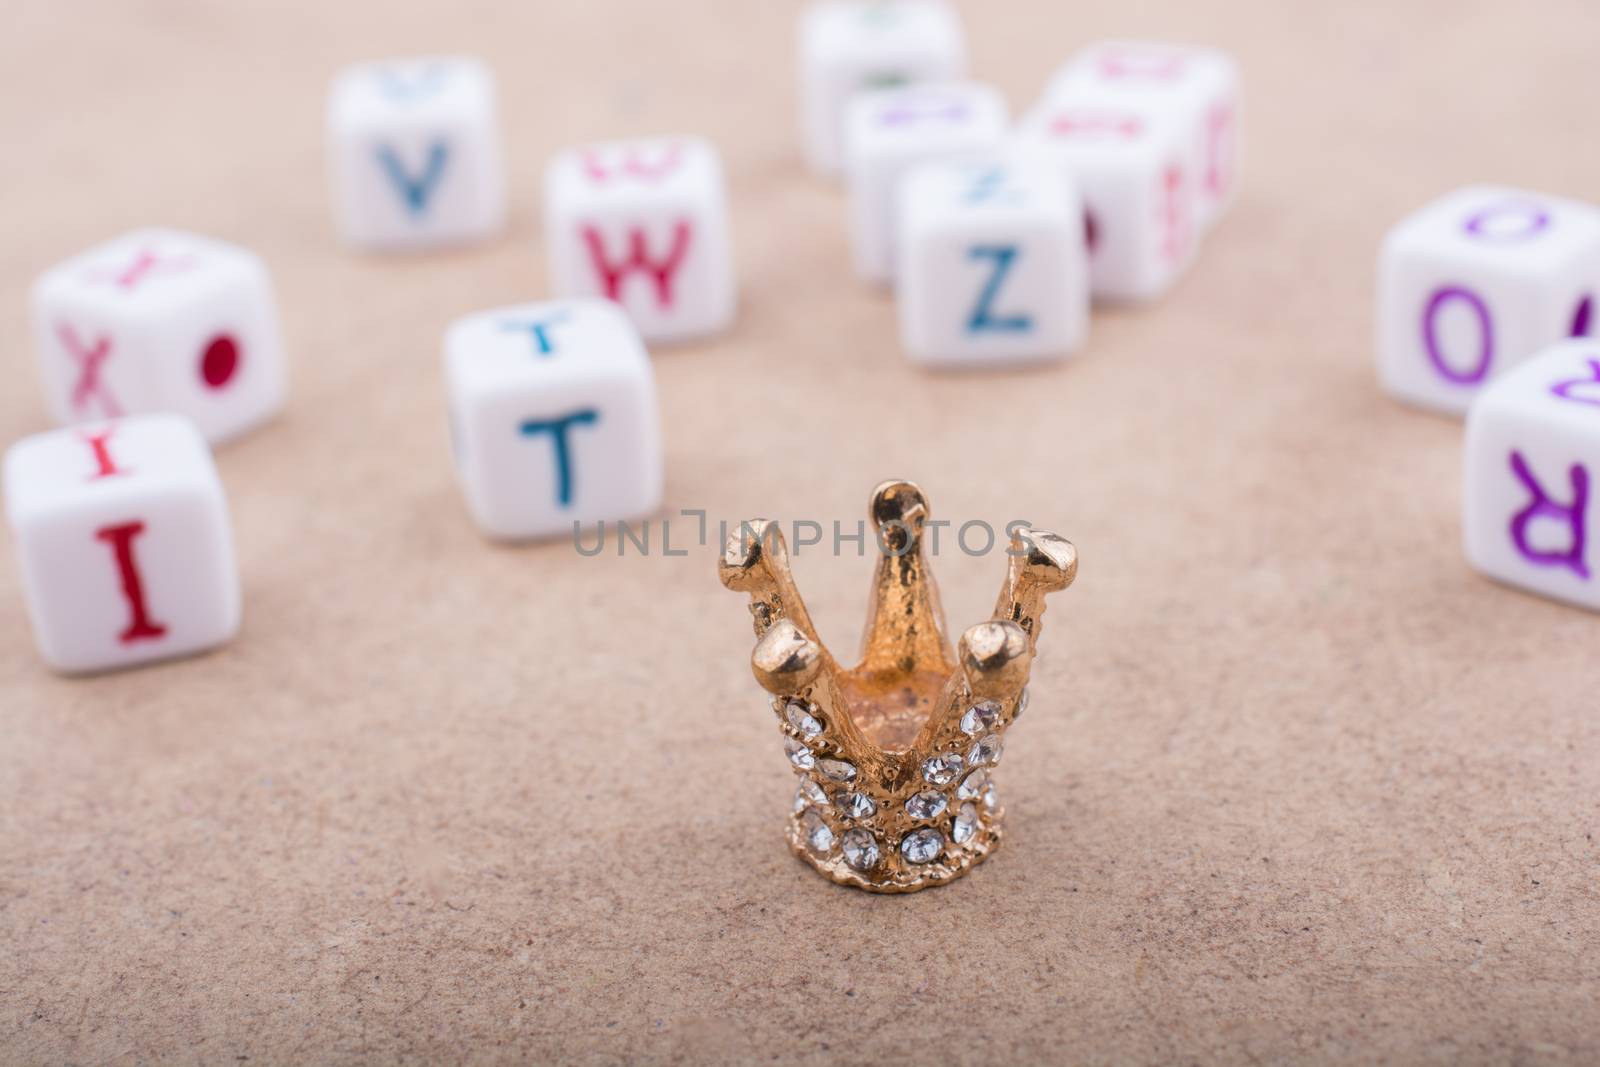 Golden color crown model in front of the letter cubes